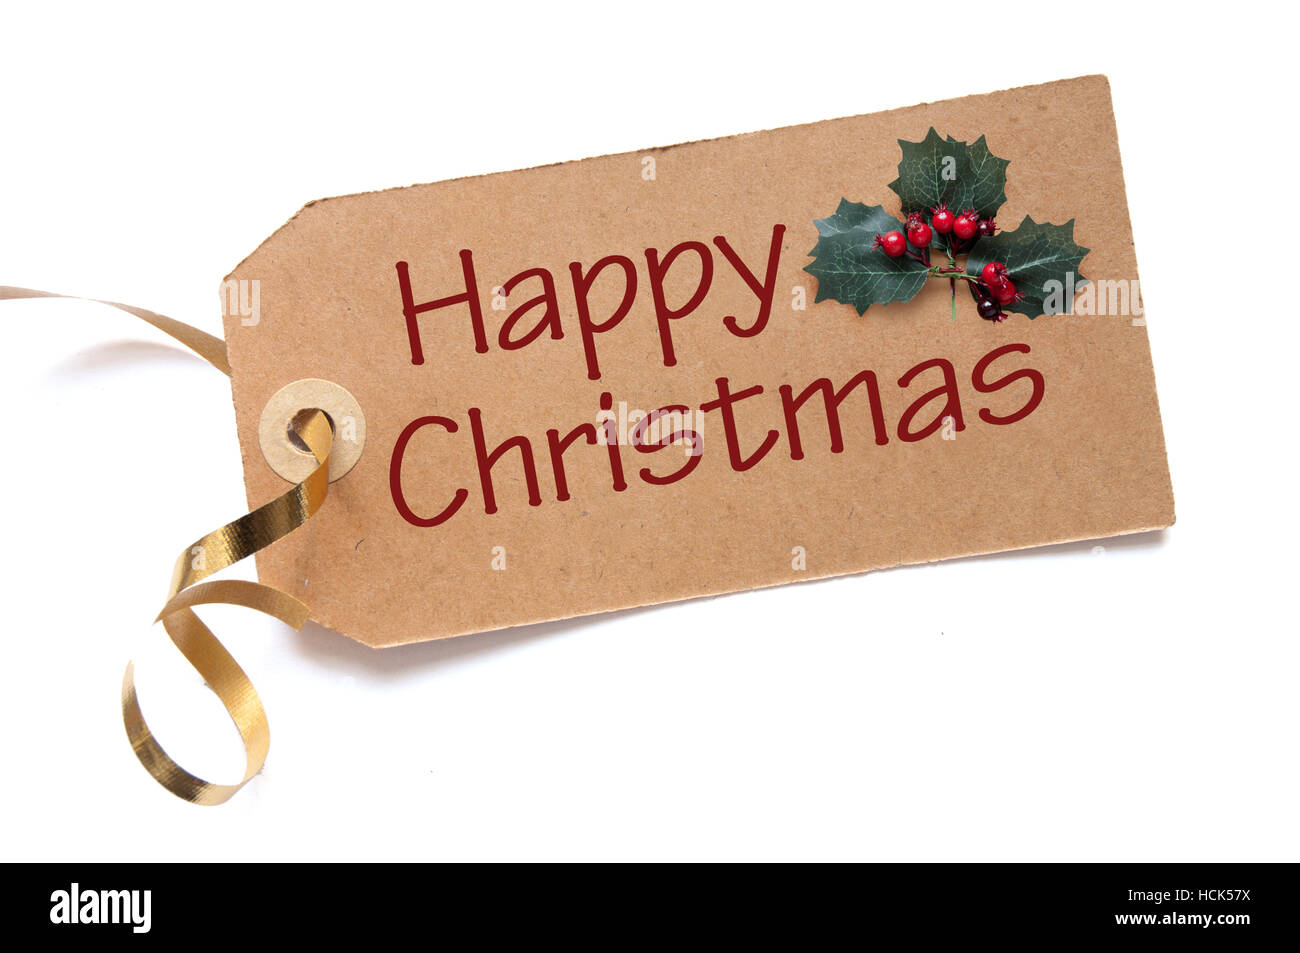 Happy Christmas handwritten on a label with holly leaves Stock Photo